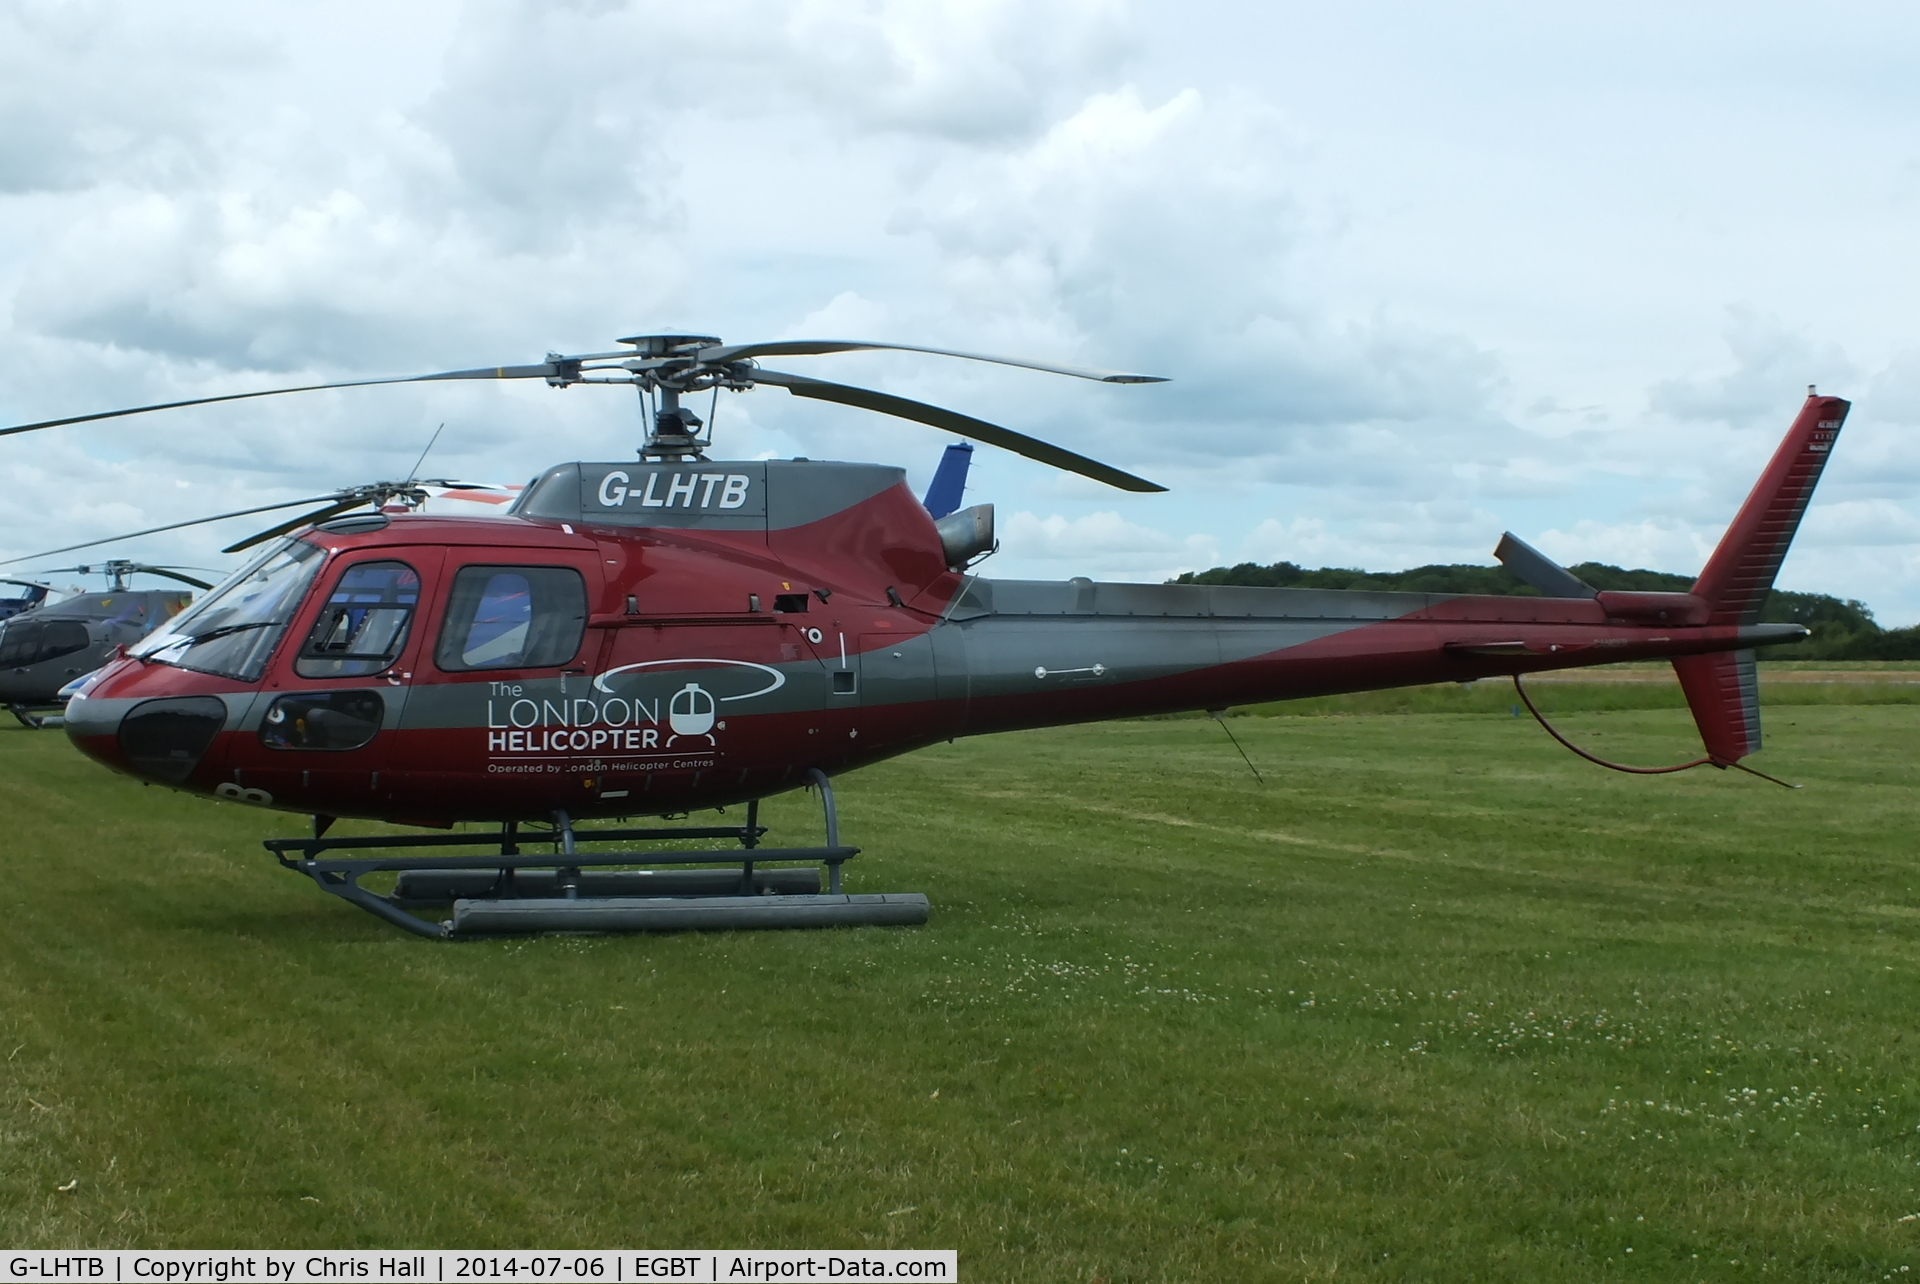 G-LHTB, 2009 Eurocopter AS-350B-2 Ecureuil Ecureuil C/N 4712, ferrying race fans to the British F1 Grand Prix at Silverstone